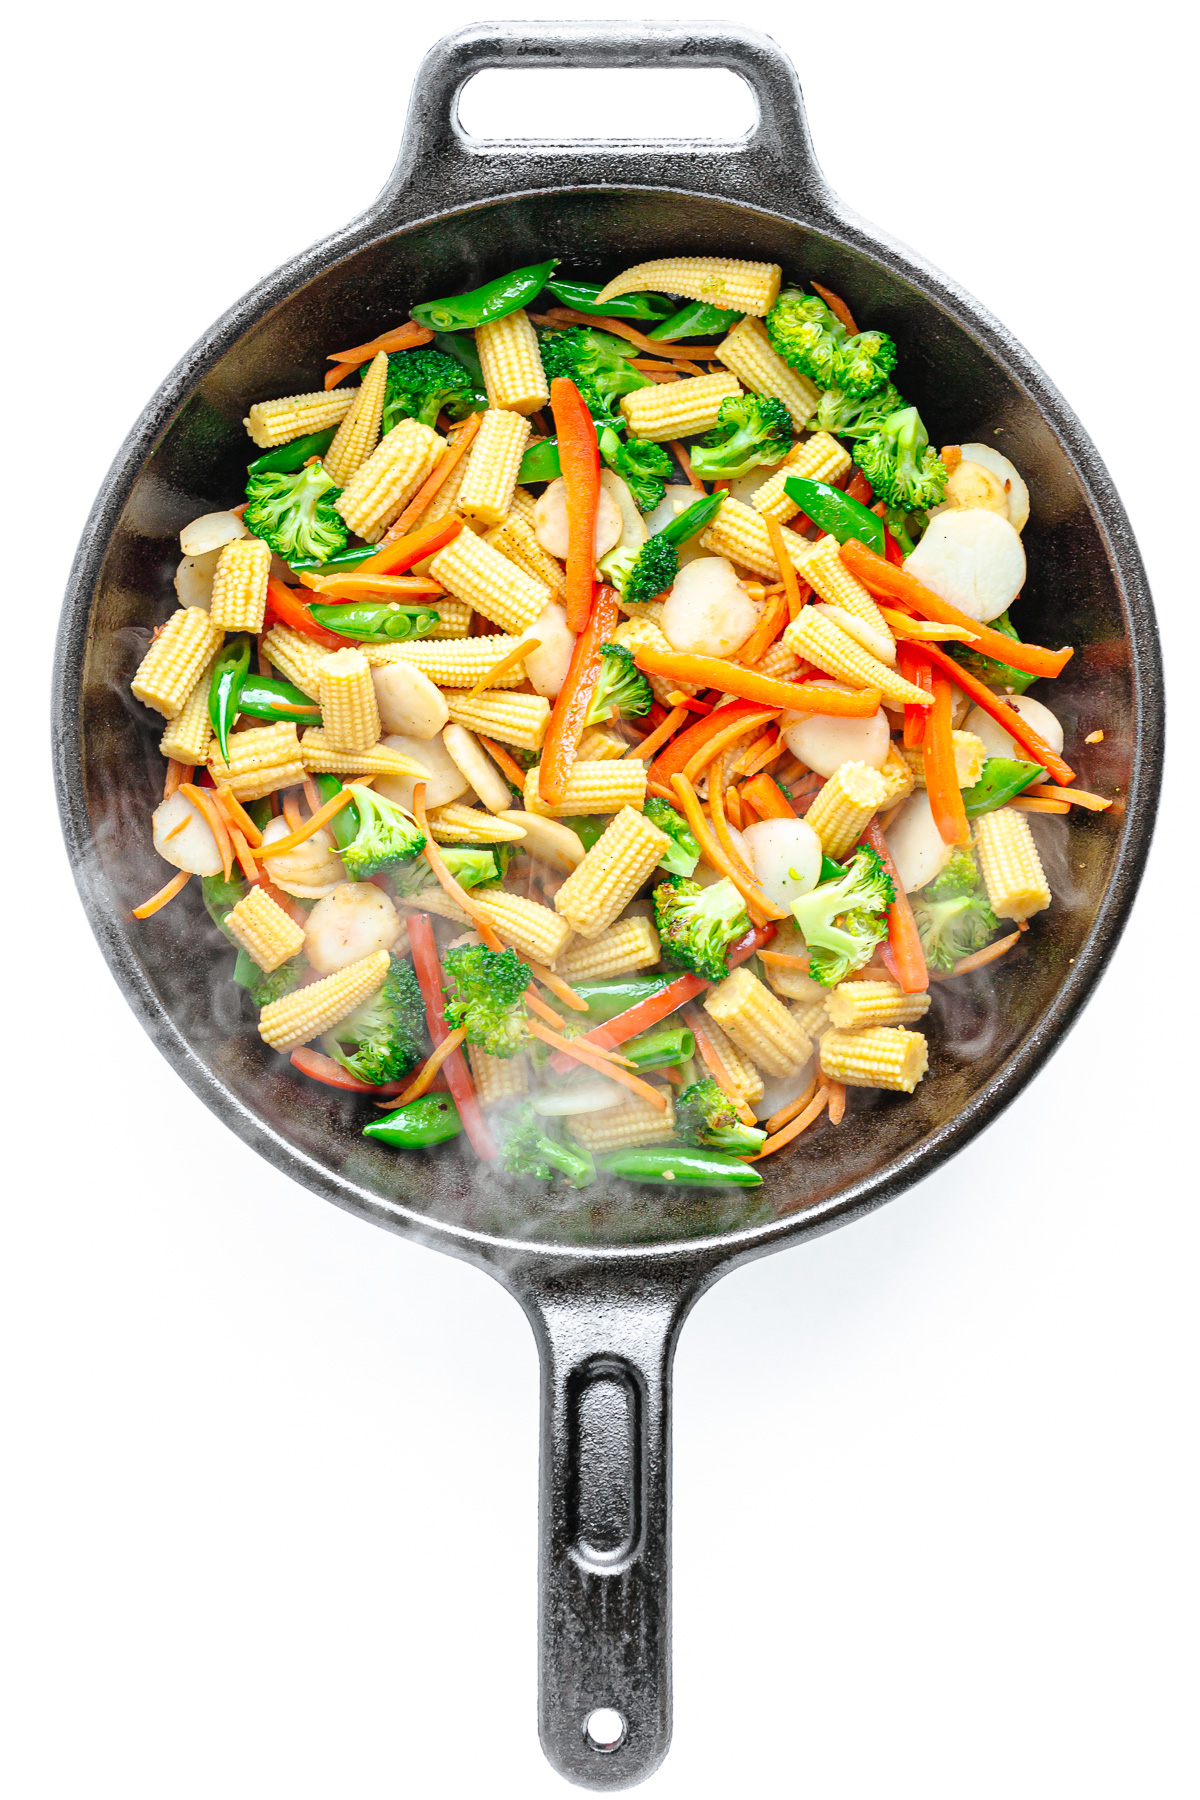 Variety of stir fry vegetables in a cast iron skillet.